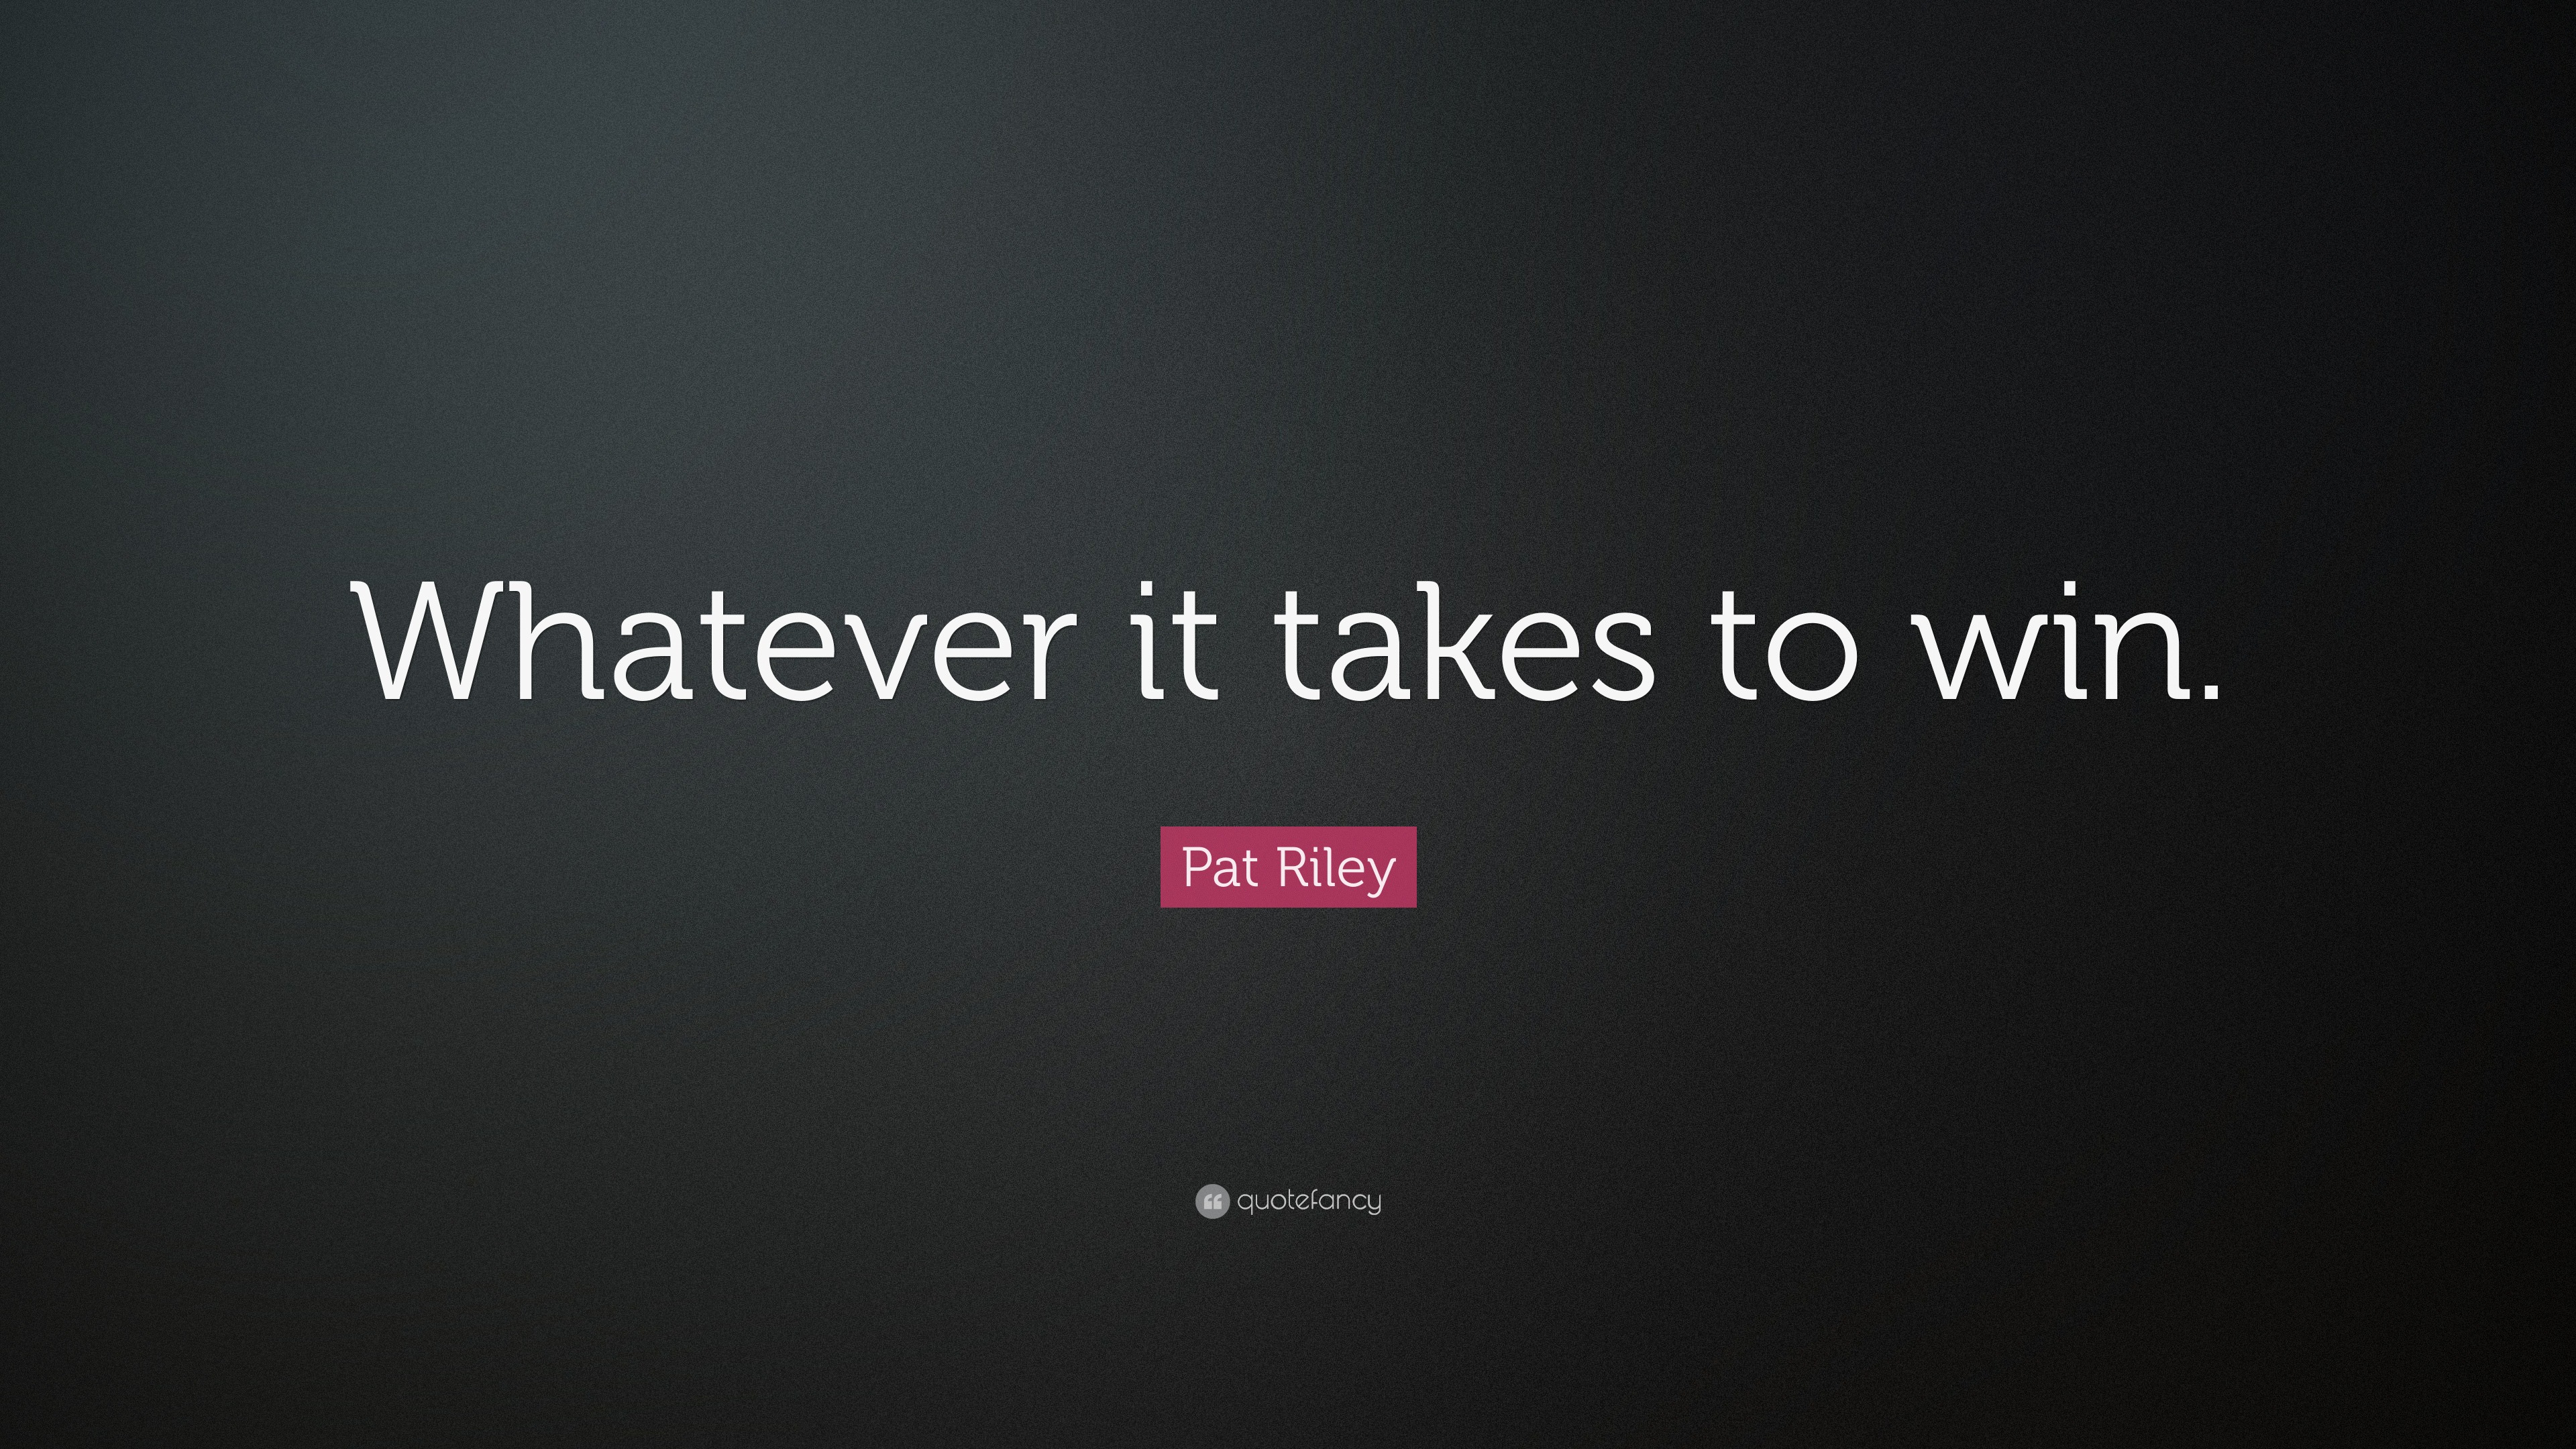 Pat Riley Quote: “Whatever it takes to win.”